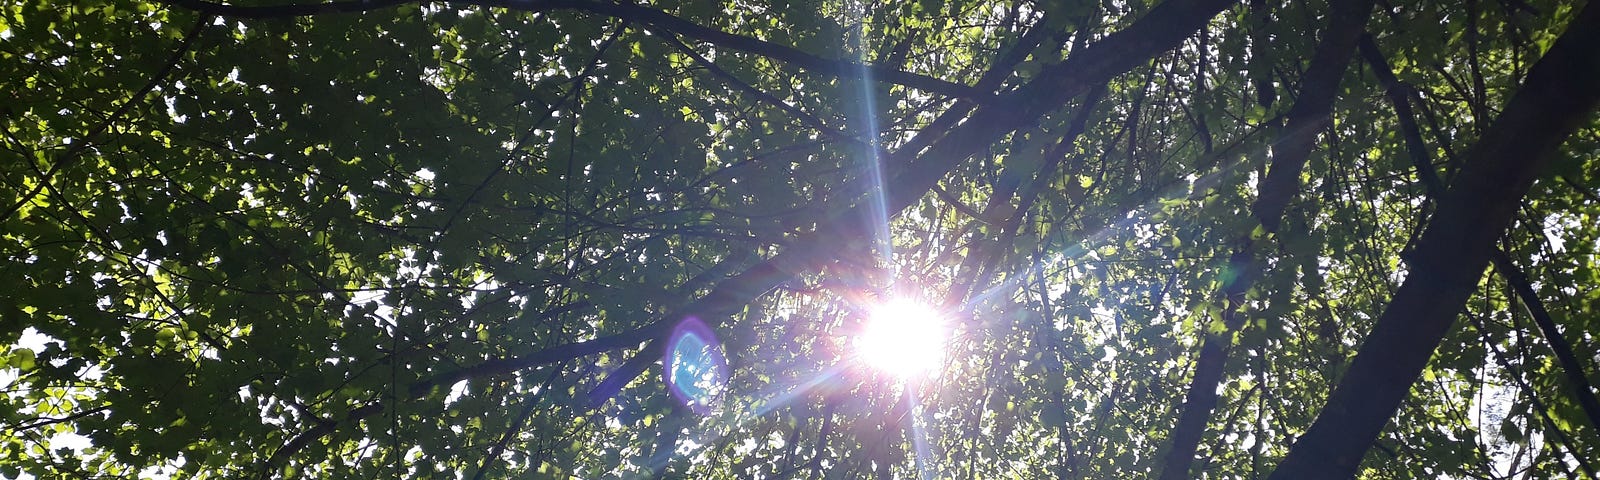 Sun diffracted through canopy of leaves.